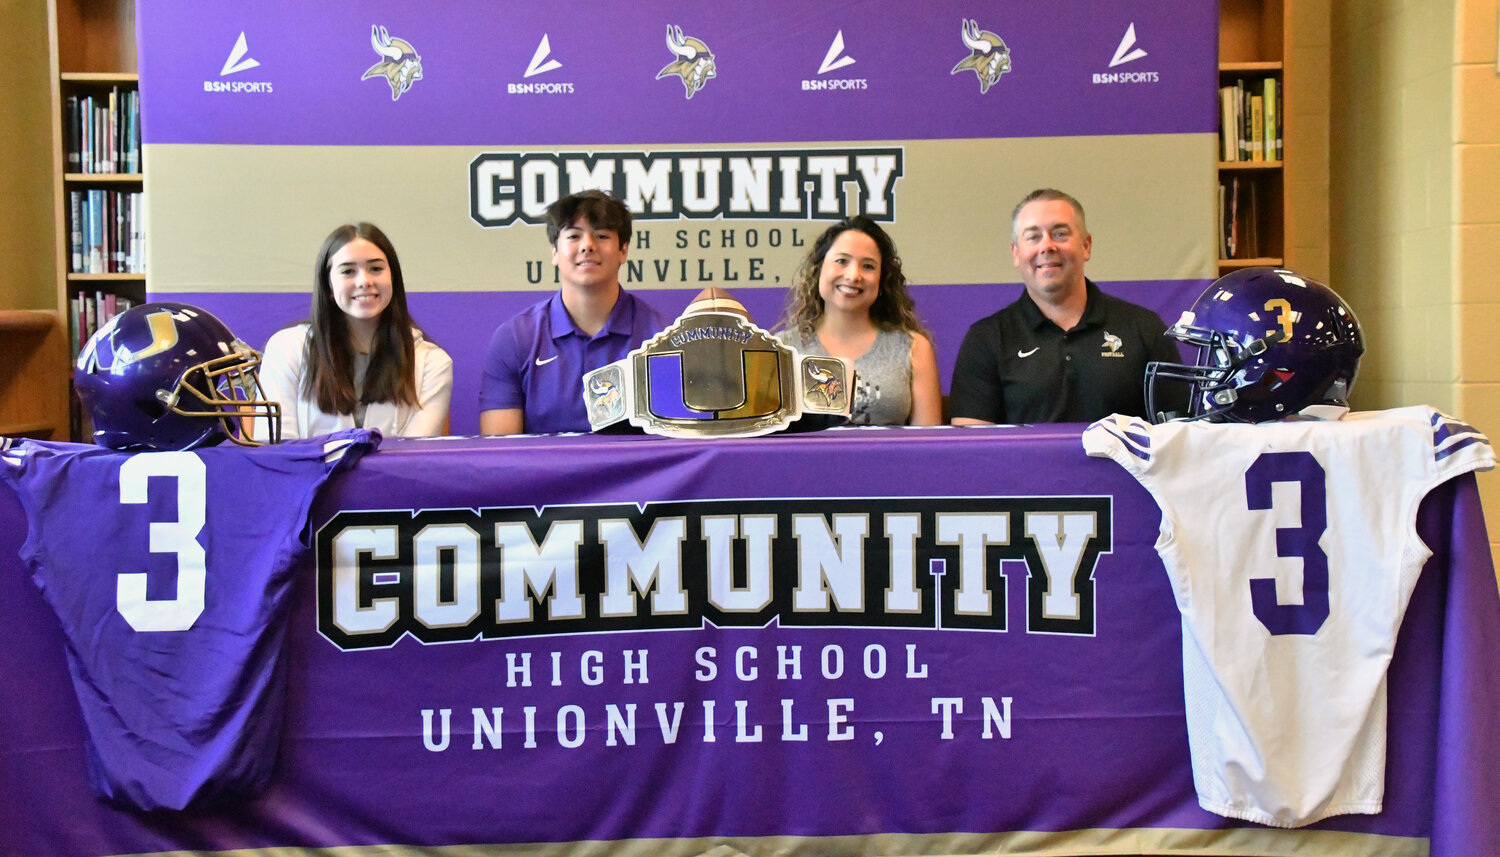 Dallas Grooms signs his letter of intent to continue his football career at Sewanee.